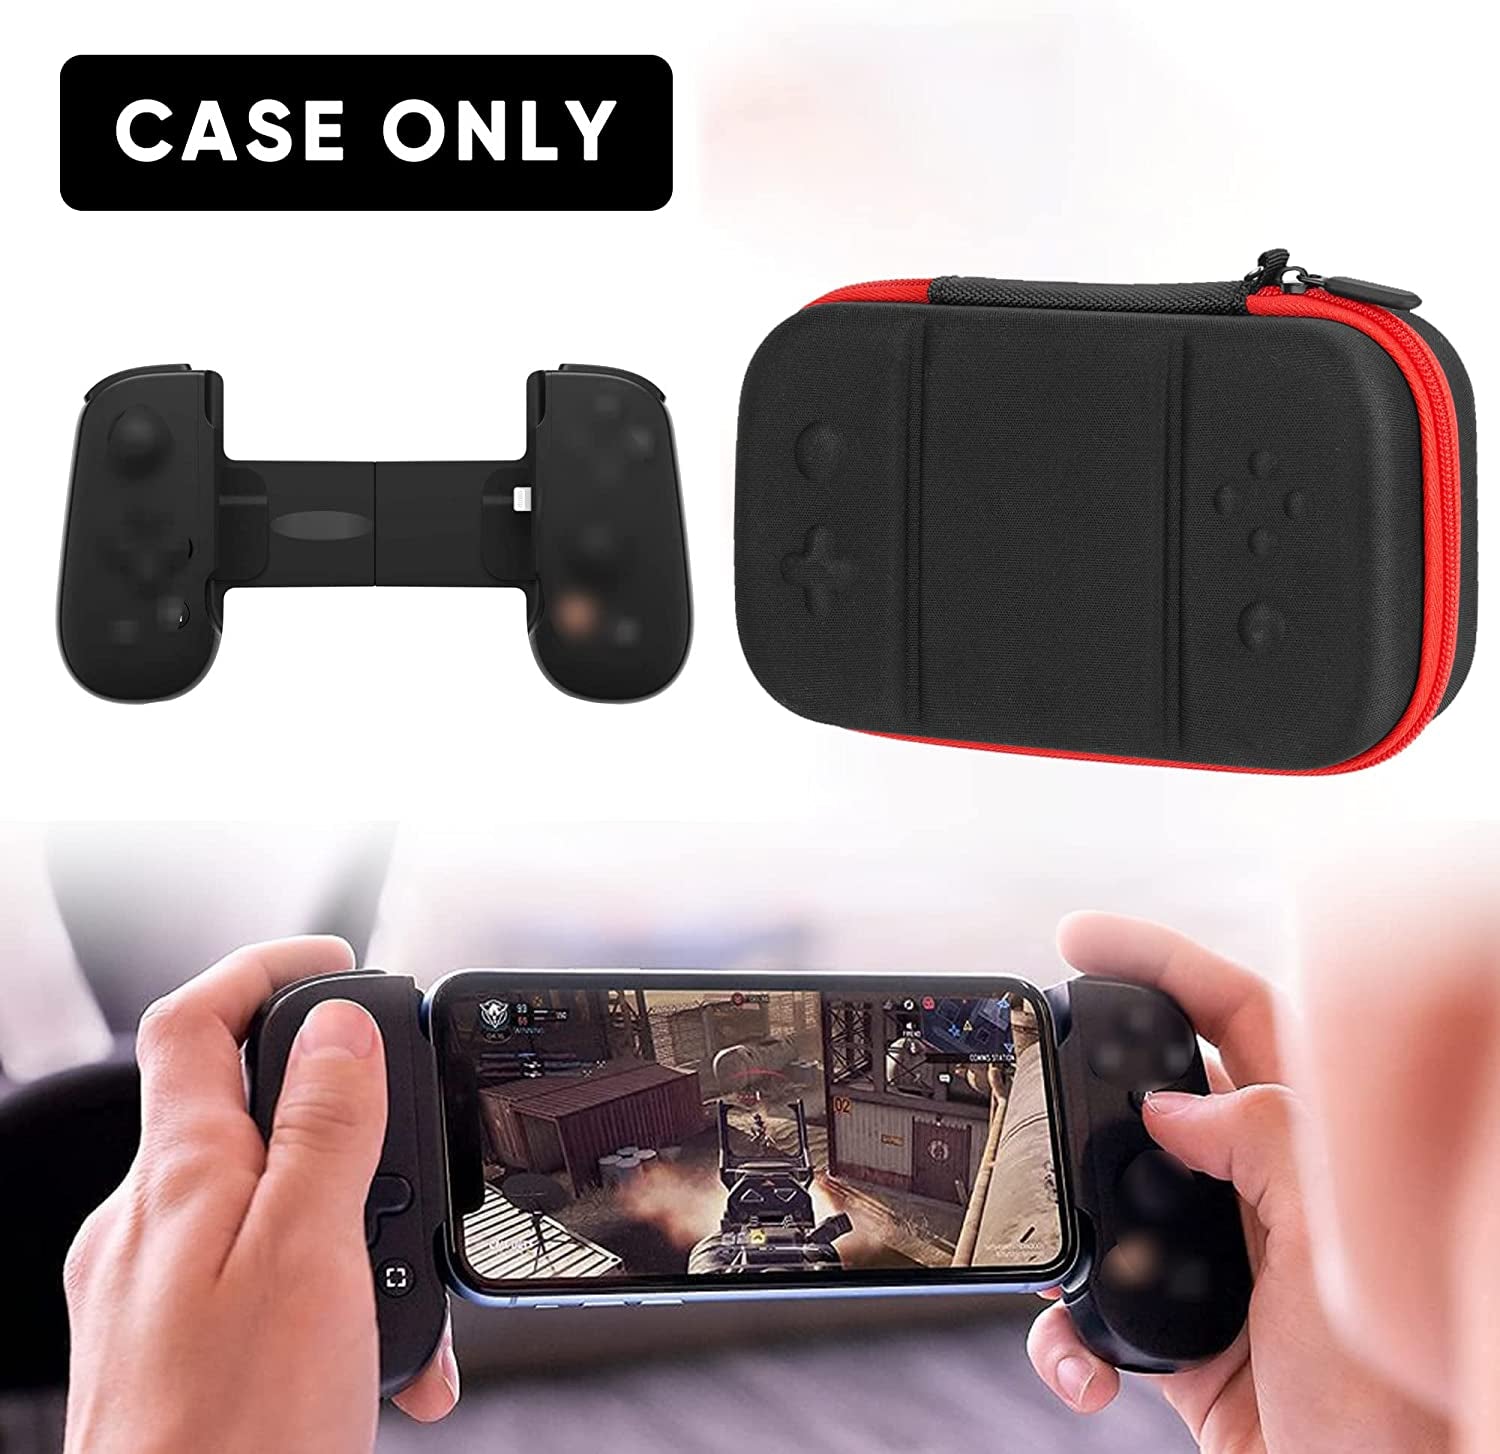 Gamepad Carrying Case Compatible with Backbone One Gaming Controller with Wrist Strap and Mesh Pocket for Accessories.(Case Only)